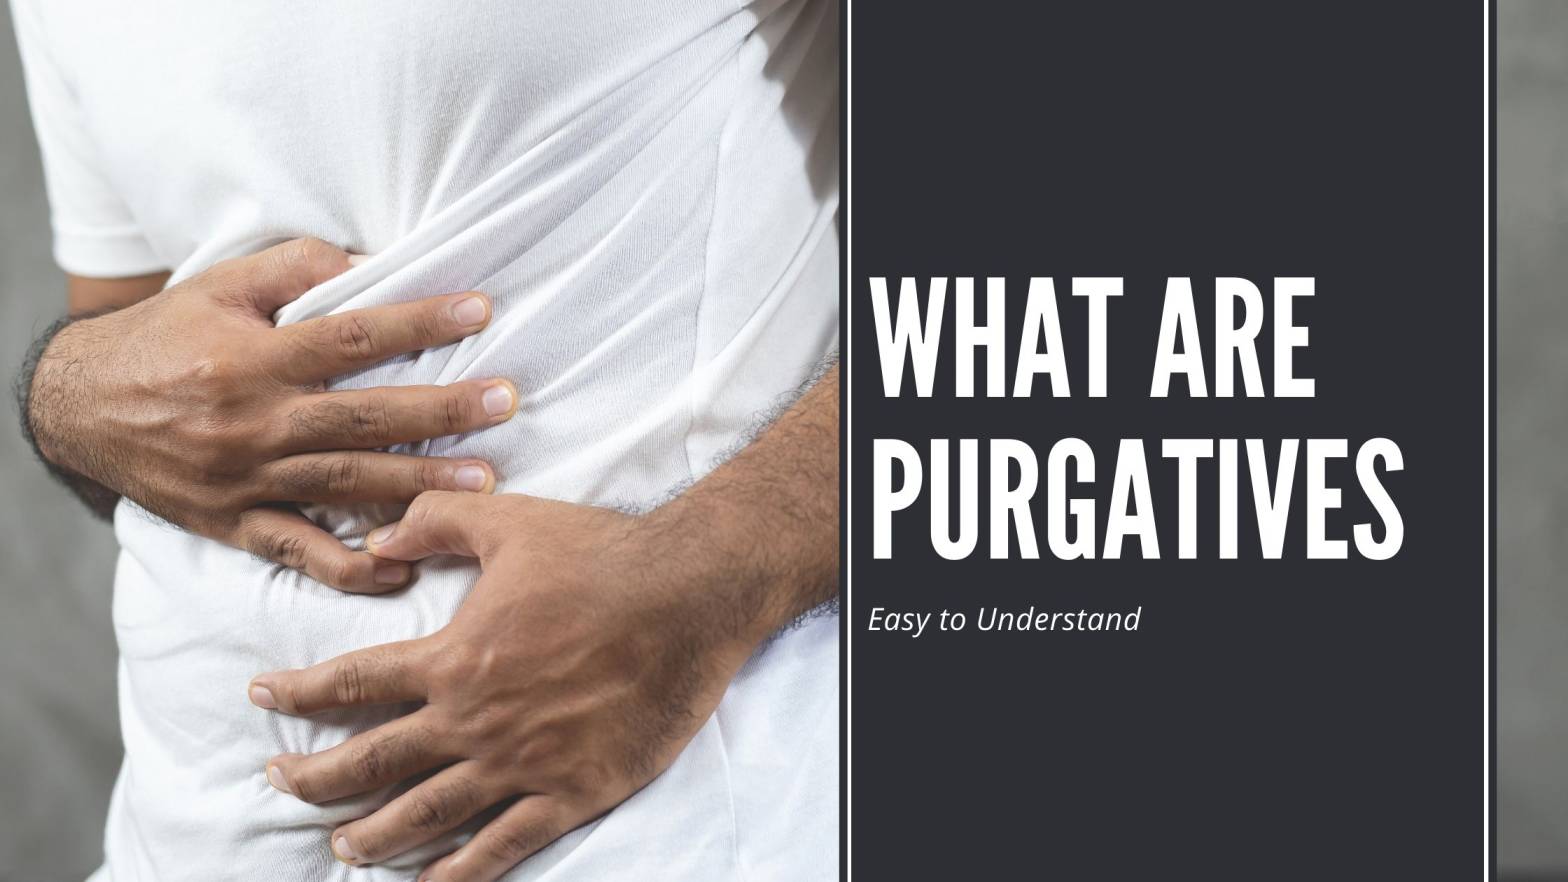 What Are Purgatives